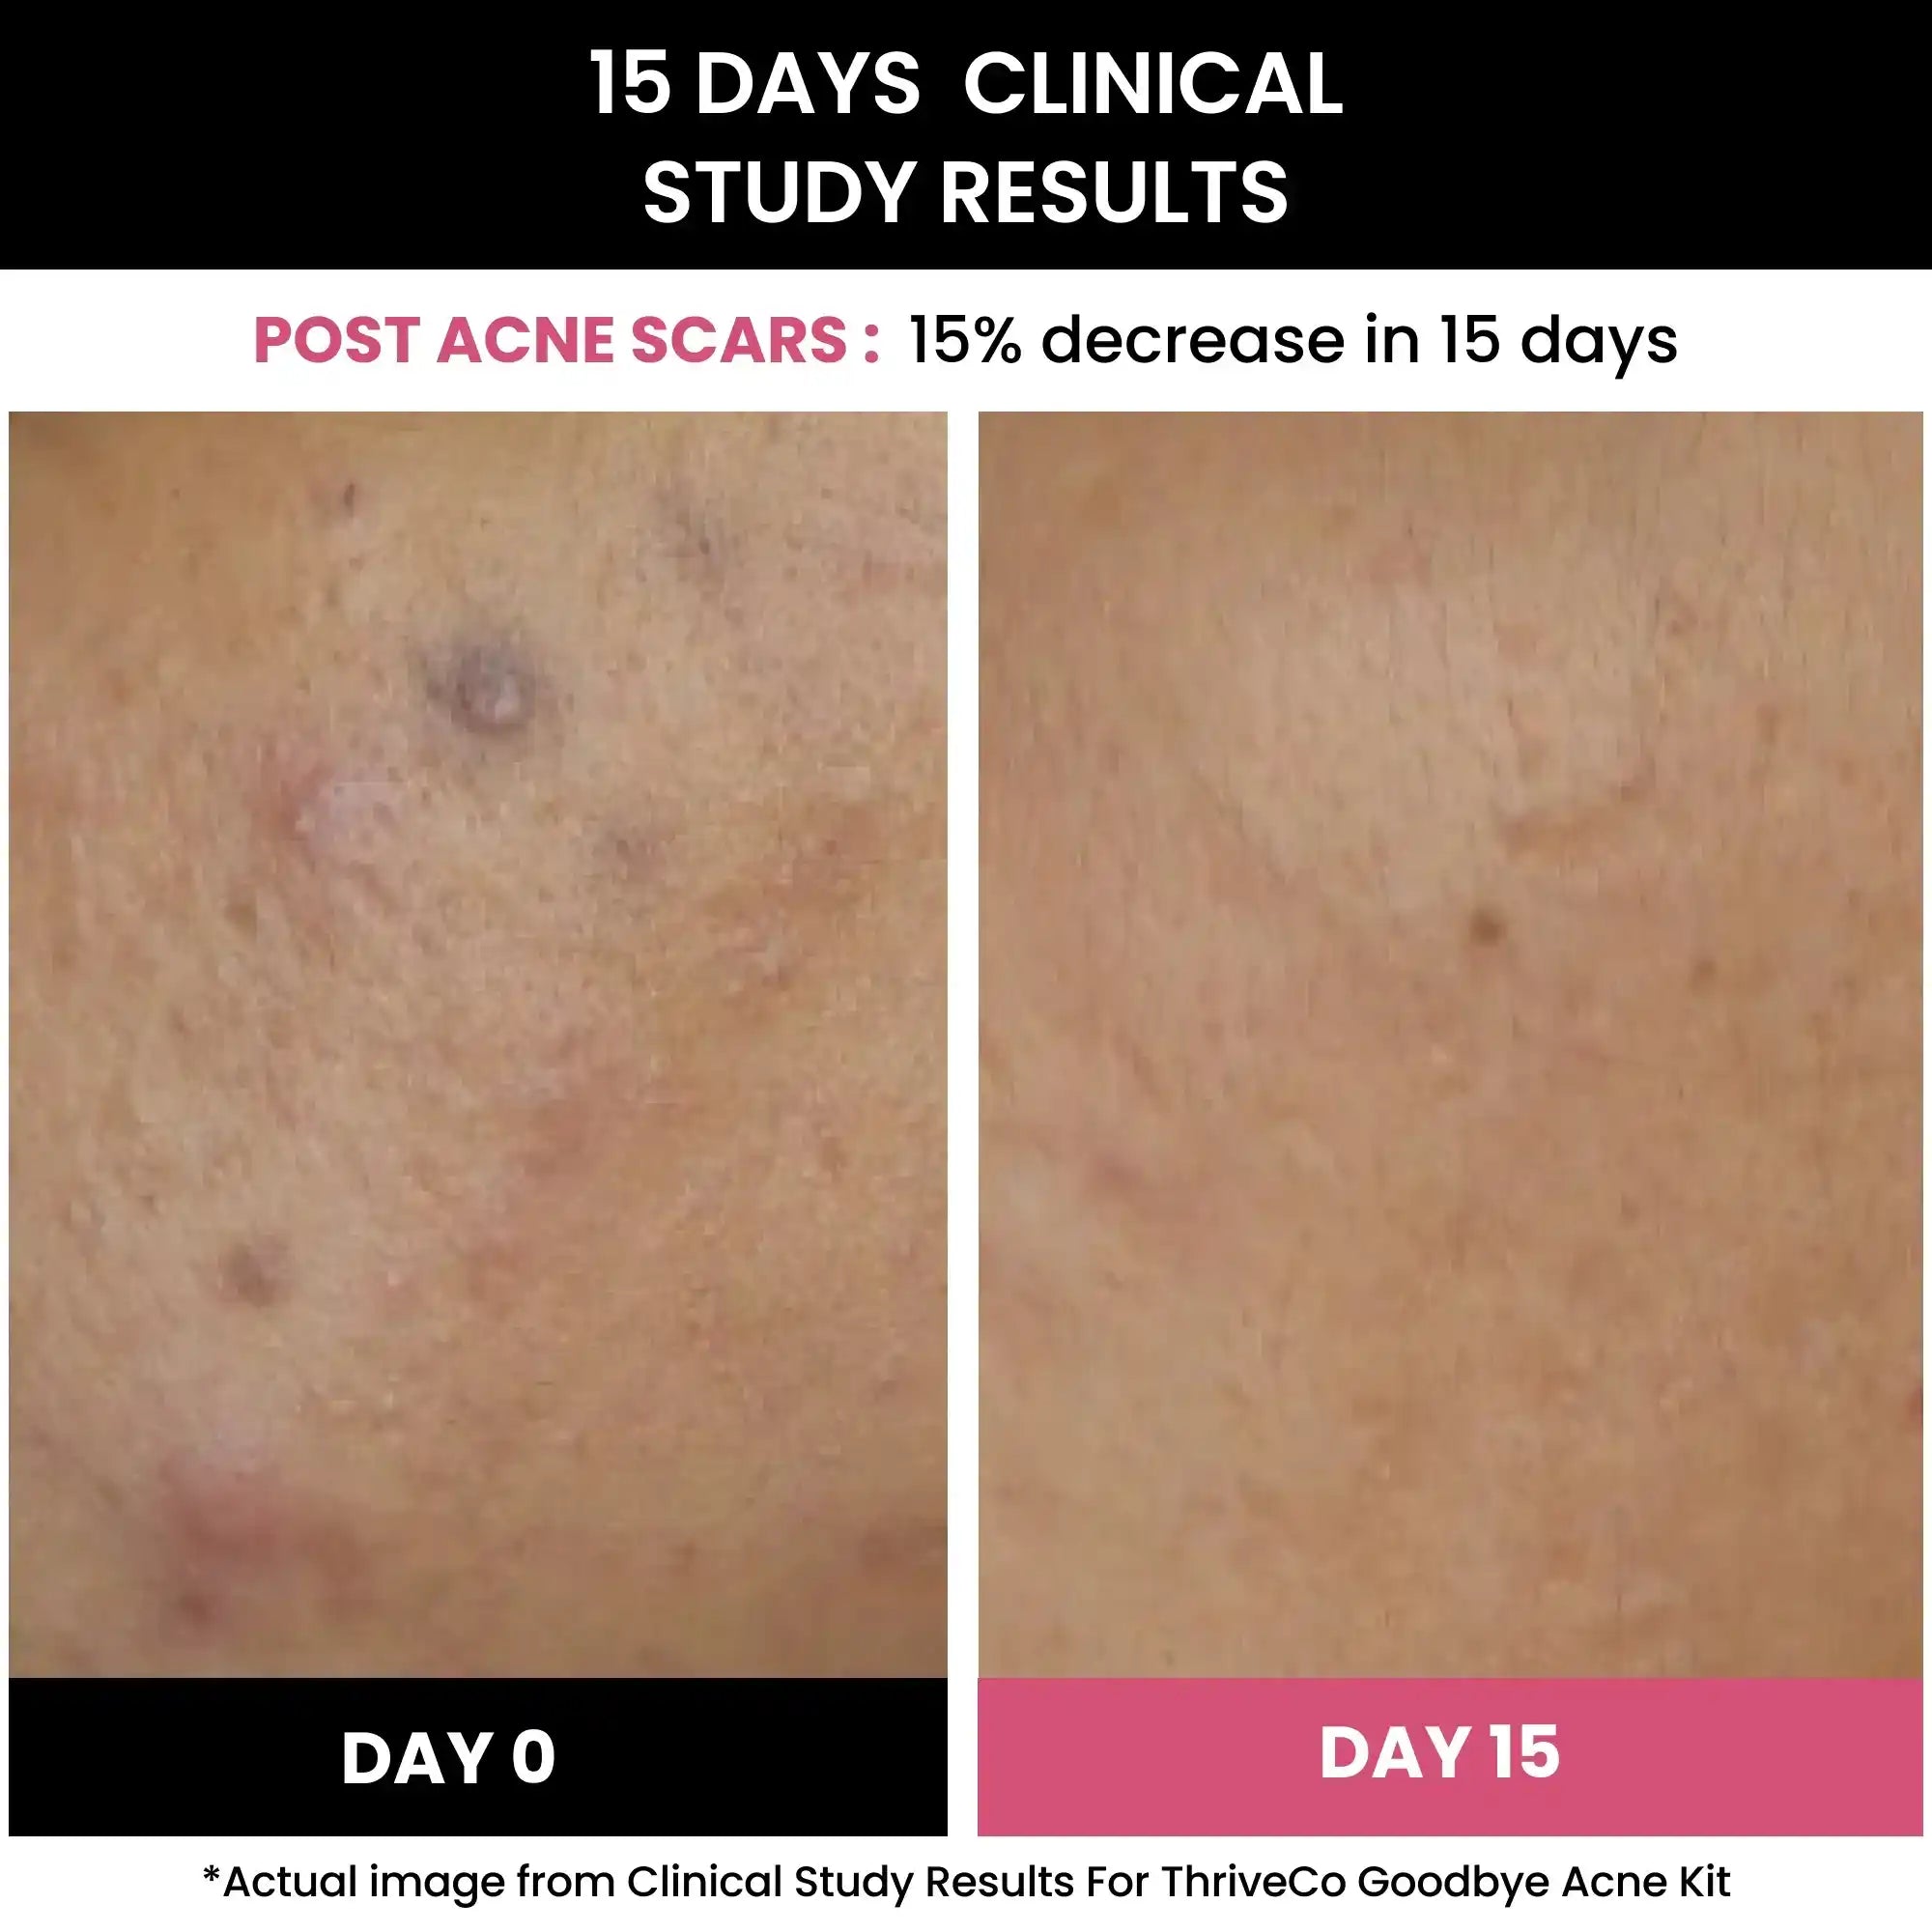 Before and after results of ThriveCo Goodbye Acne Kit for women